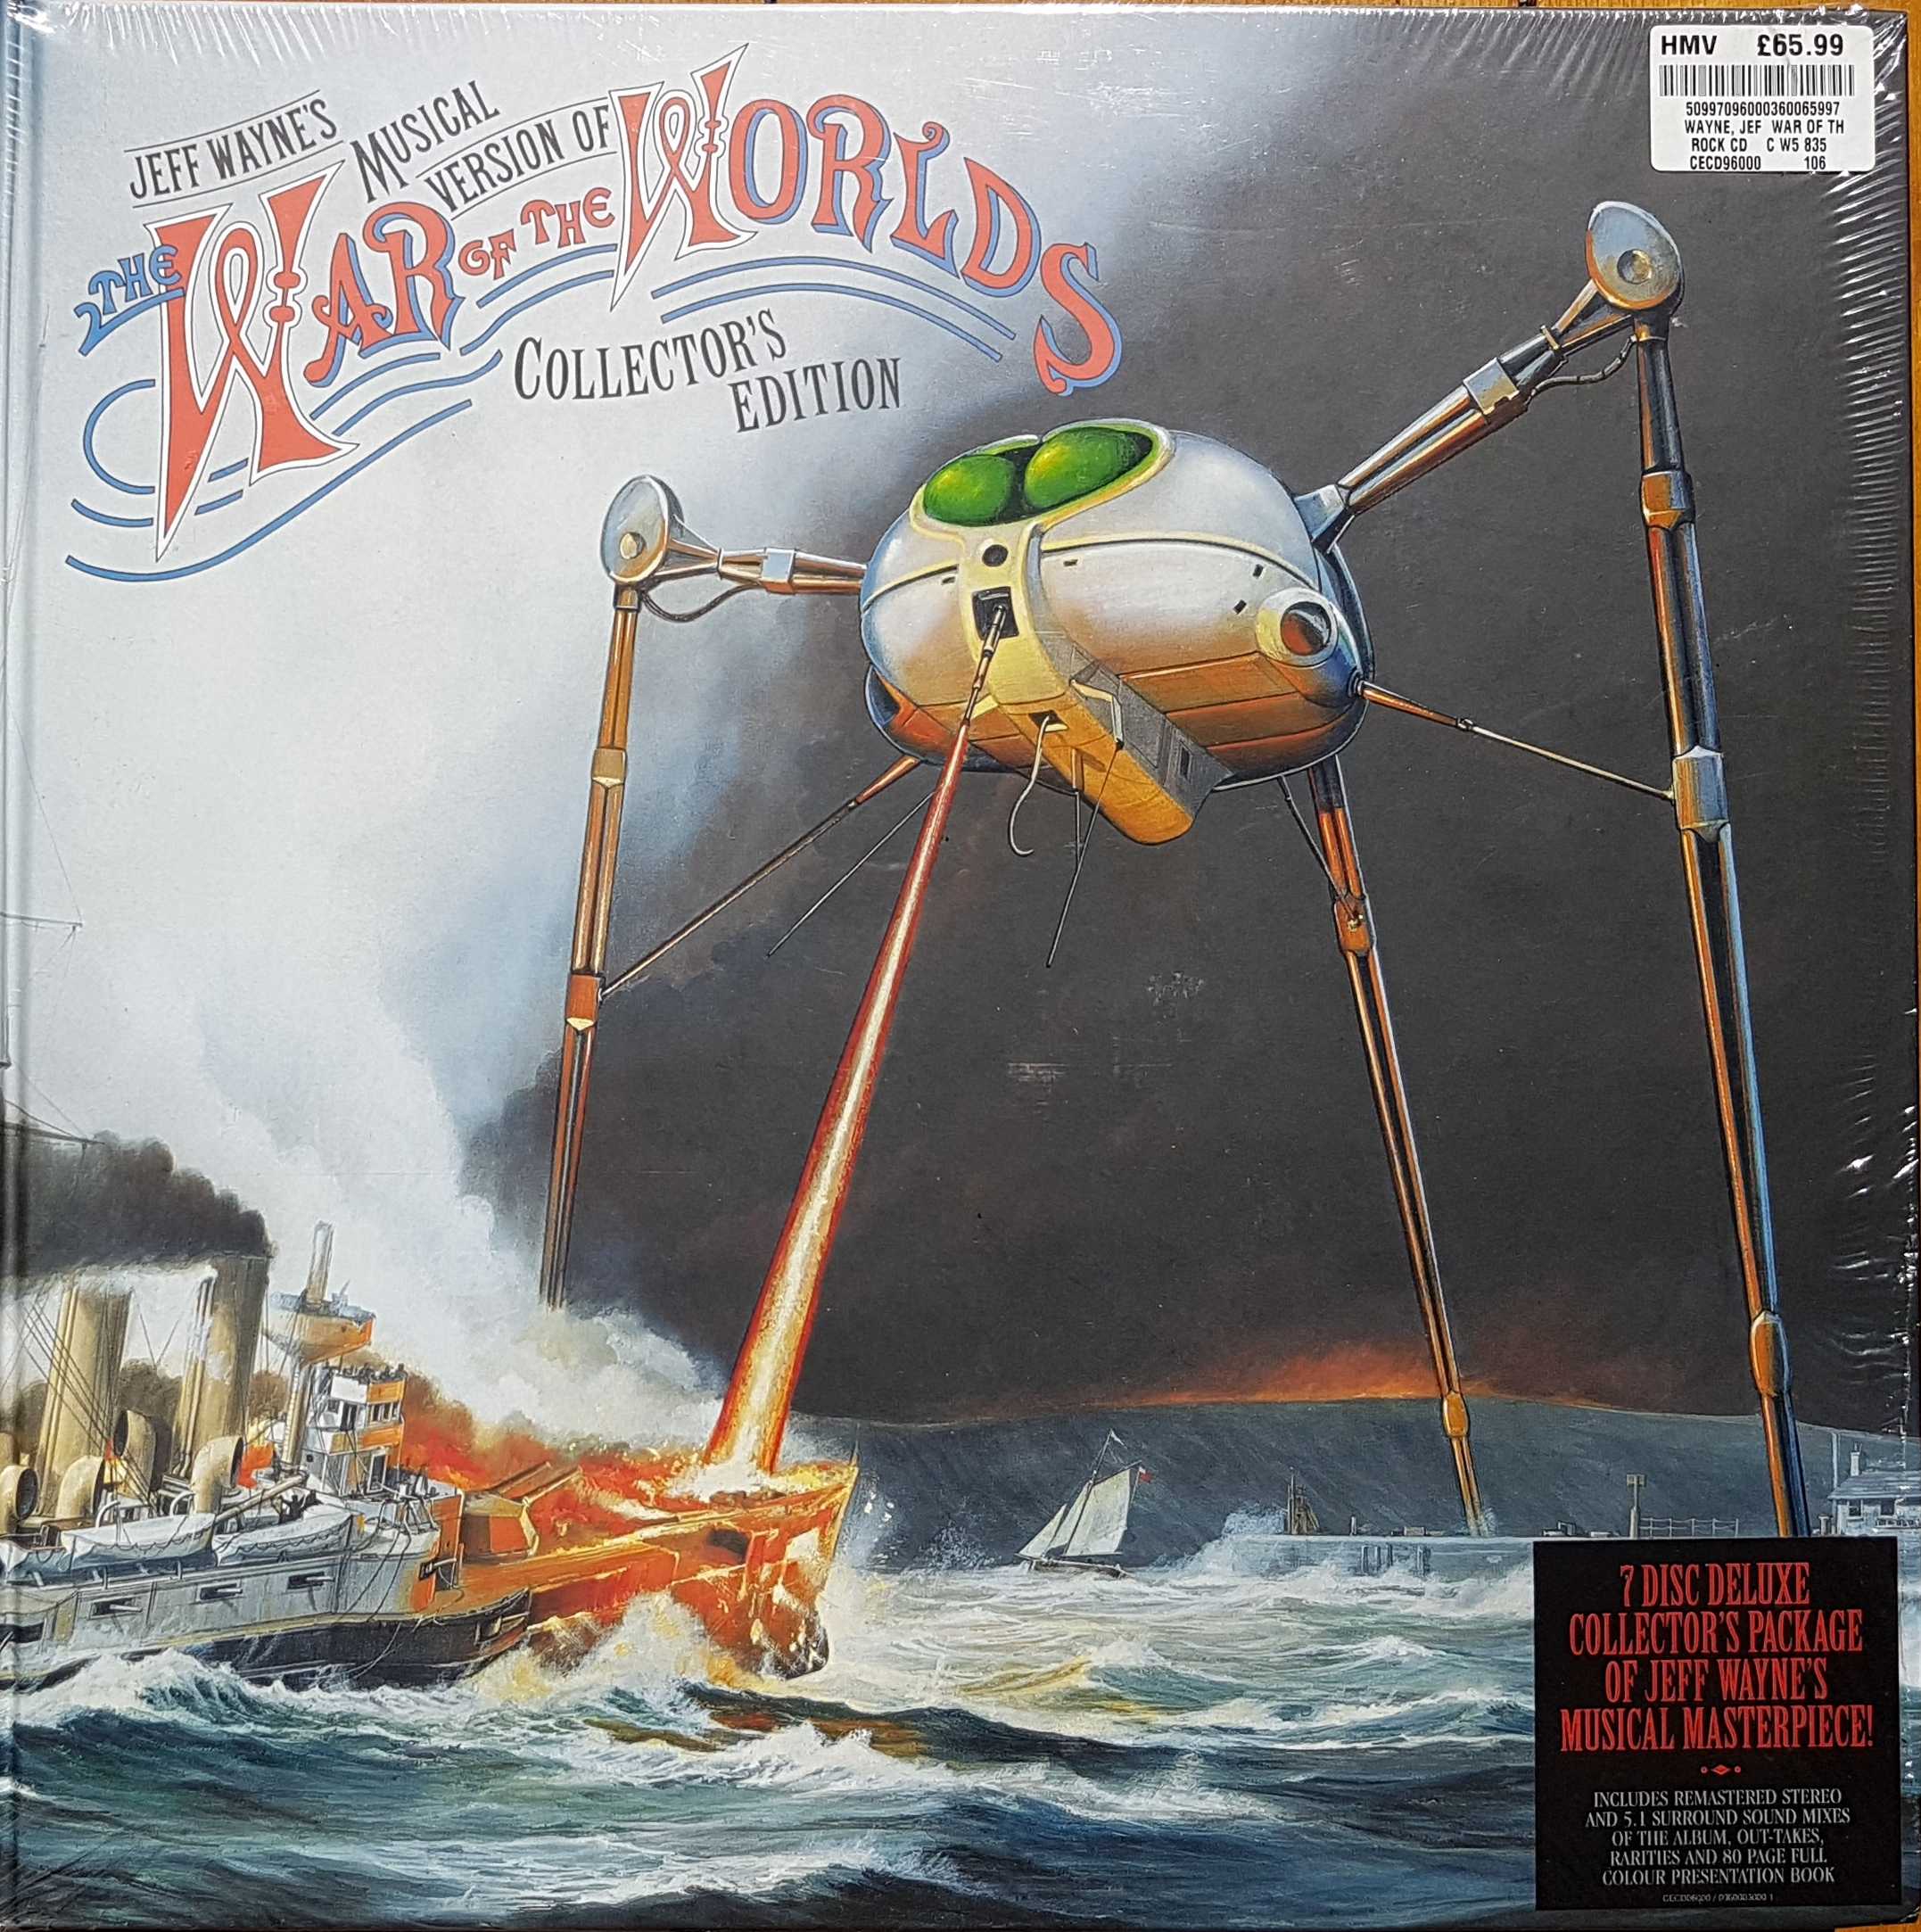 Picture of CECD 96000 War of the Worlds by artist Jeff Wayne from ITV, Channel 4 and Channel 5 library